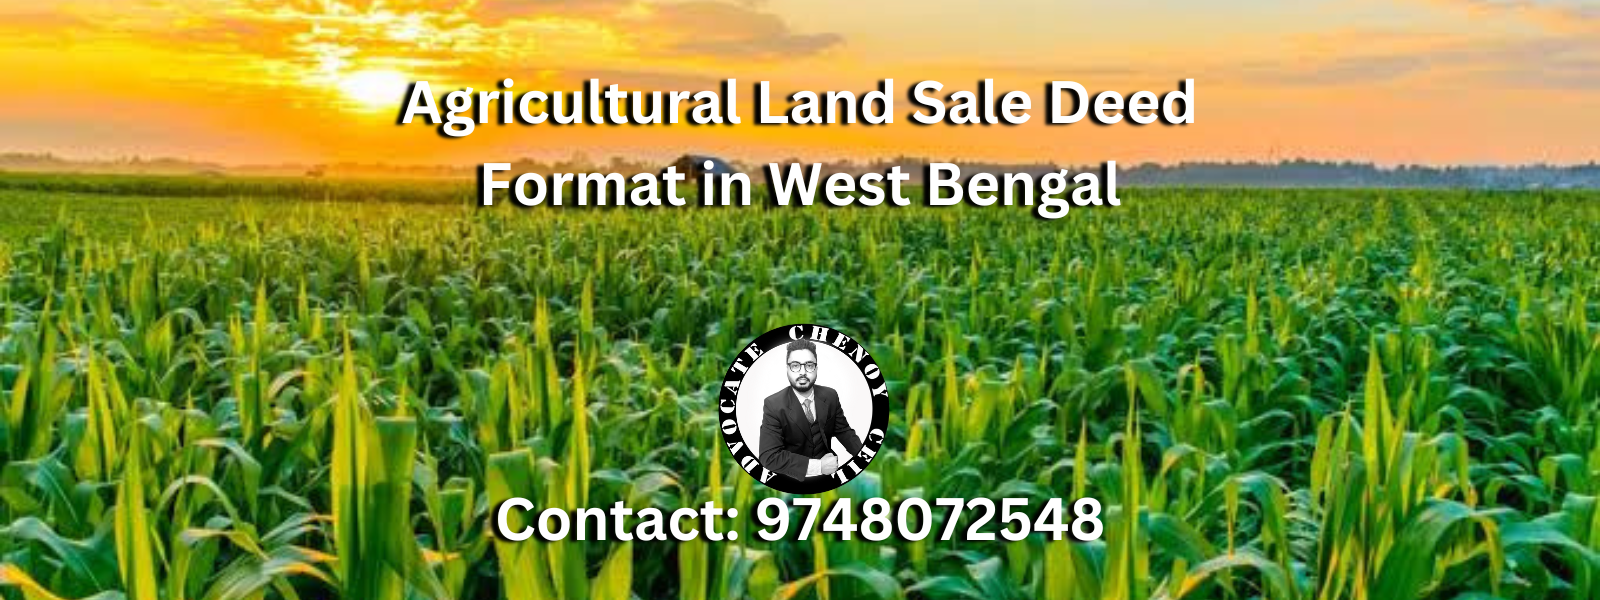 Agricultural land sale deed format